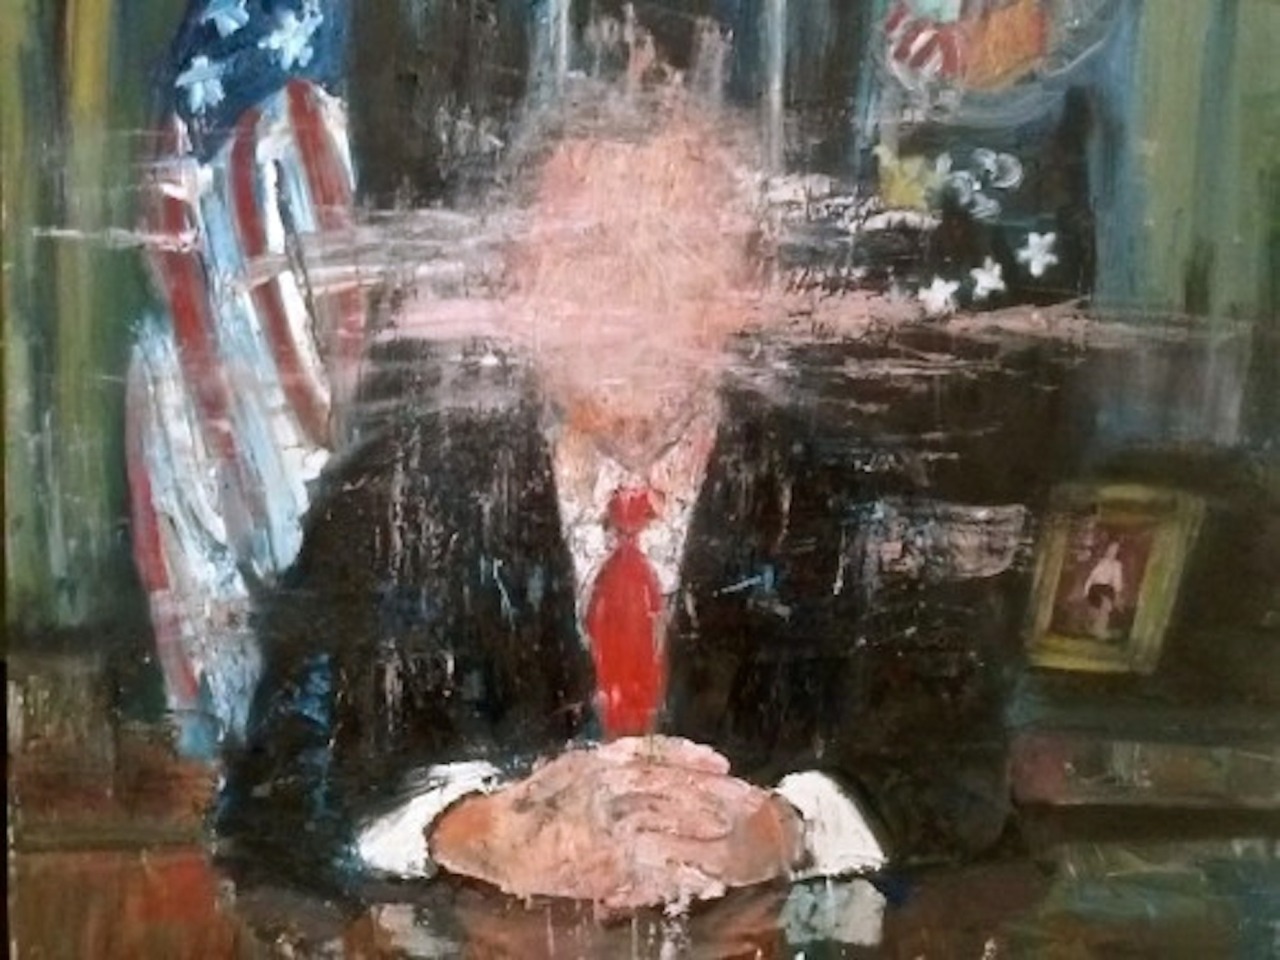 G.W. Bush Defaced, 24x30,  Oil on canvas, Sandra Koponen © 2015OFFICE OF THE PRESIDENTGeorge W. Bush, PresidentJan. 20, 2001 - Jan. 20, 2009President Bush presided over the torture administration. He issued a still-secret order authorizing the CIA to establish secret detention facilities overseas and to interrogate detainees. Over the legal and policy objections of State Department officials, Bush also determined that the Geneva Conventions did not apply to suspected Taliban and al Qaeda detainees in U.S. custody, a legal maneuver that set the stage for future torture. Through his subordinates, including the National Security Council Principals Committee, who met in the White House to discuss the use of particular interrogation techniques to be used on particular detainees, he authorized the use of &ldquo;enhanced interrogation techniques&rdquo; by the CIA and other harsh techniques by the military. Asked about those meetings on national television, Bush affirmed that he knew and approved of them &hellip; In his subsequent memoir, Bush acknowledged that he personally approved waterboarding and continued to insist that it and other brutal methods were not torture.**https://www.aclu.org/files/accountability/torturers3.swf